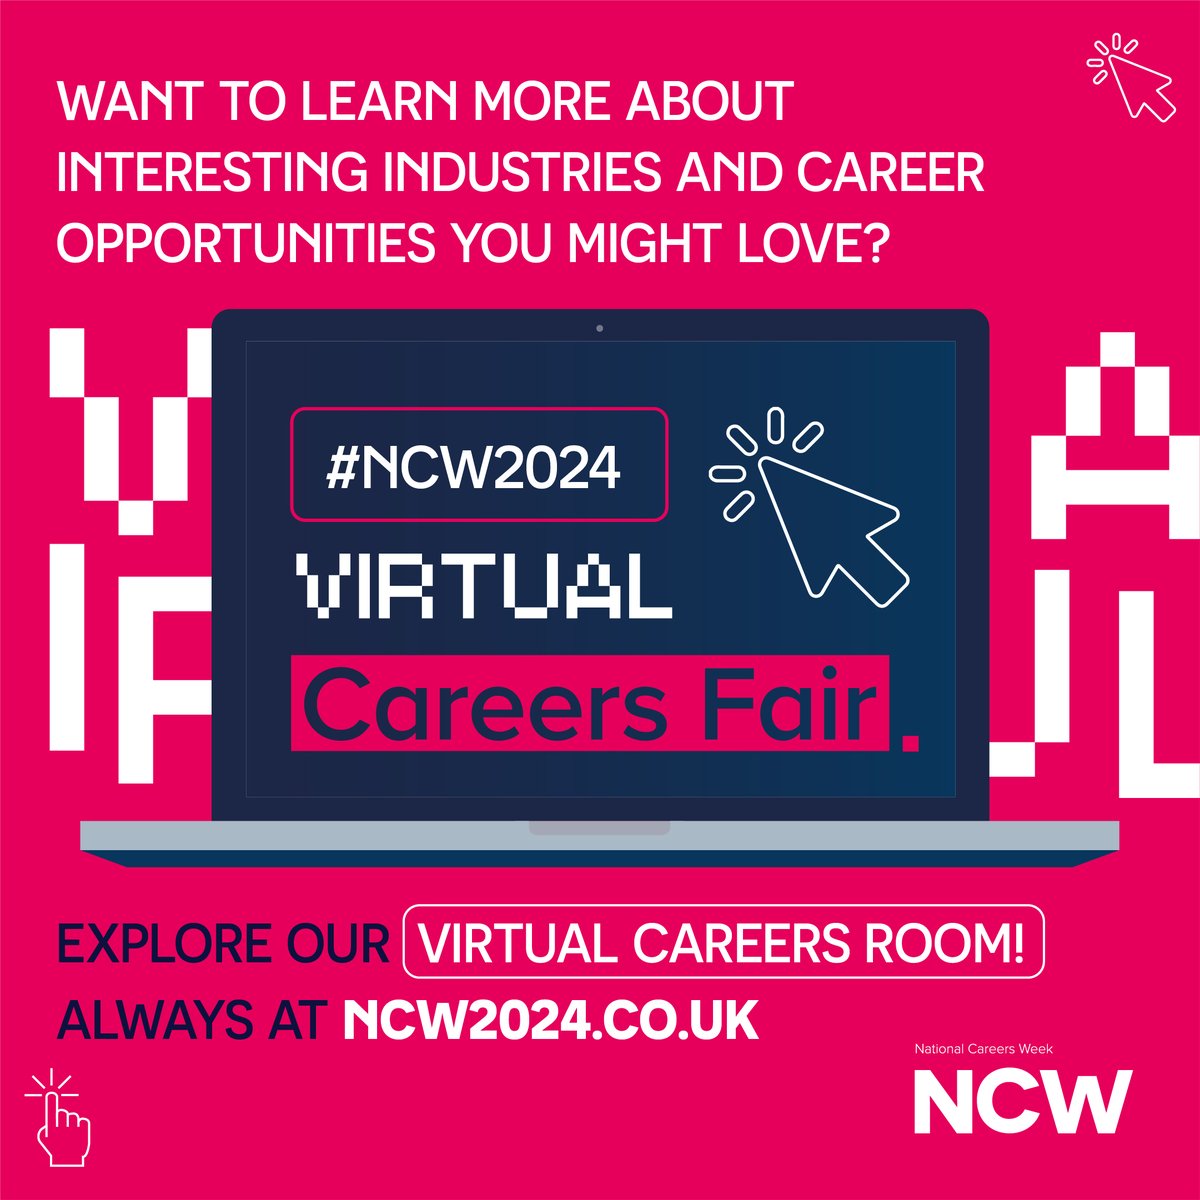 Want to learn more about interesting industries and #career opportunities you might love? 📢Explore our 𝙑𝙞𝙧𝙩𝙪𝙖𝙡 𝘾𝙖𝙧𝙚𝙚𝙧𝙨 𝙁𝙖𝙞𝙧 ➡️ncw2024.co.uk #NCW2024 #NationalCareersWeek